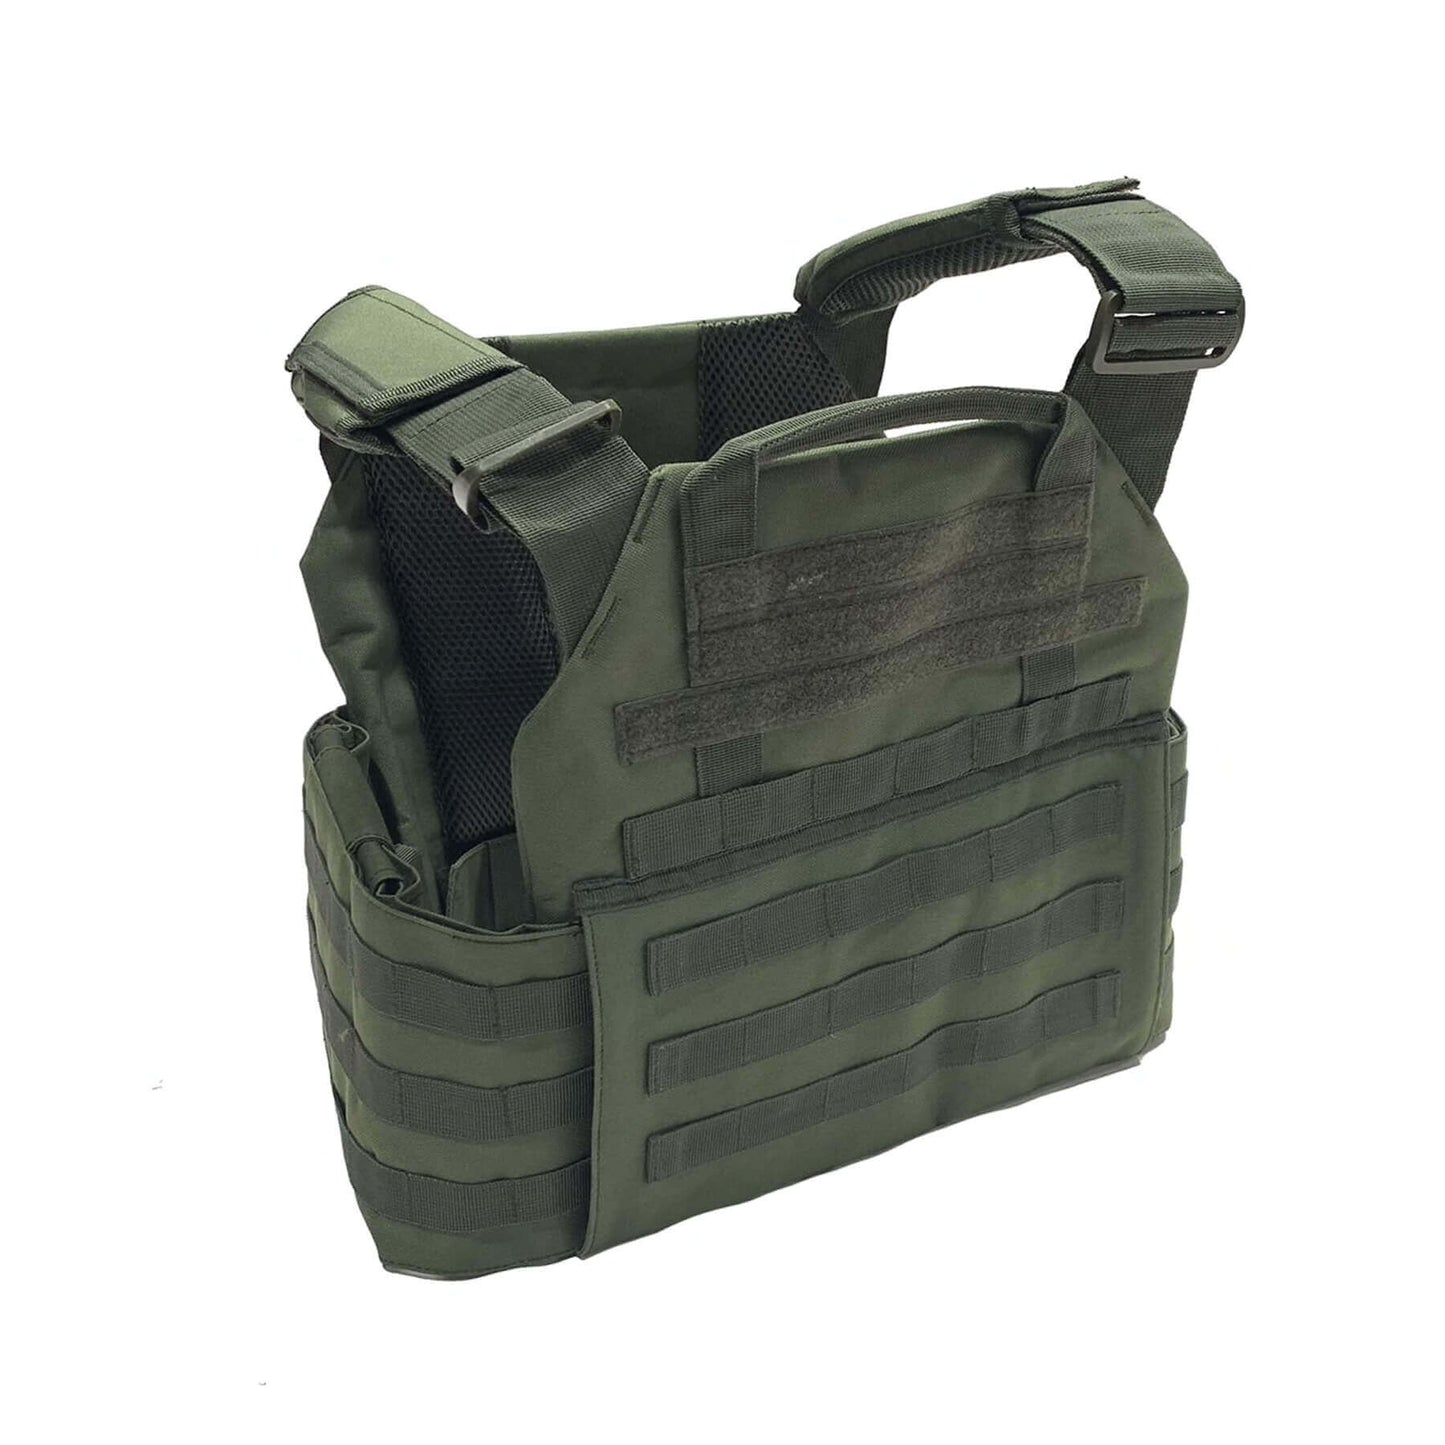 Guardian Gear LF Carrier with Side Coverage